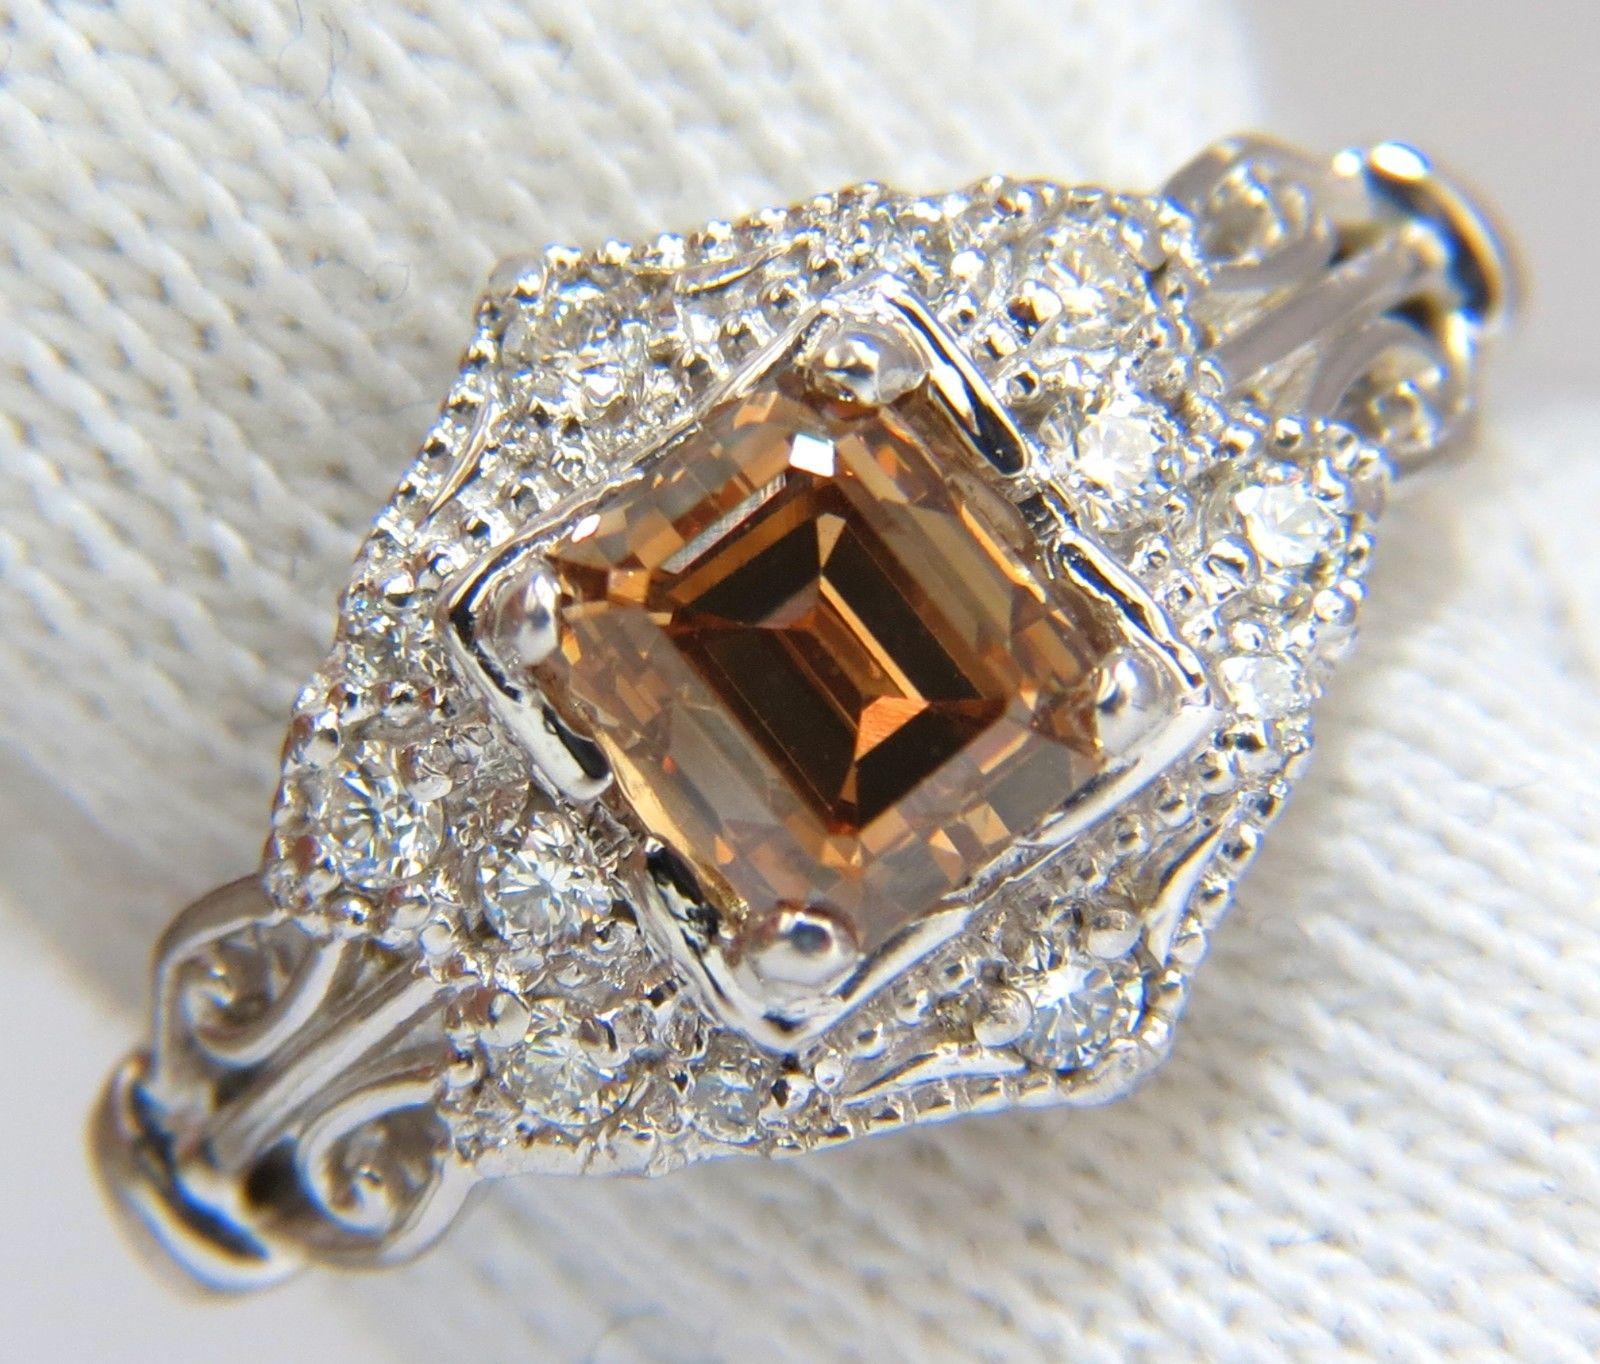 Victorian Era Fancy Natural Brown diamond ring.

1.18ct. Natural Brown Diamond

Emerald cut

Vs-2 - clarity



Side round diamonds:

.21ct. 

G-color Vs-2 clarity

  14kt. white gold

4 grams

Ring Current size: 6.5

(Free Resize Service, Please